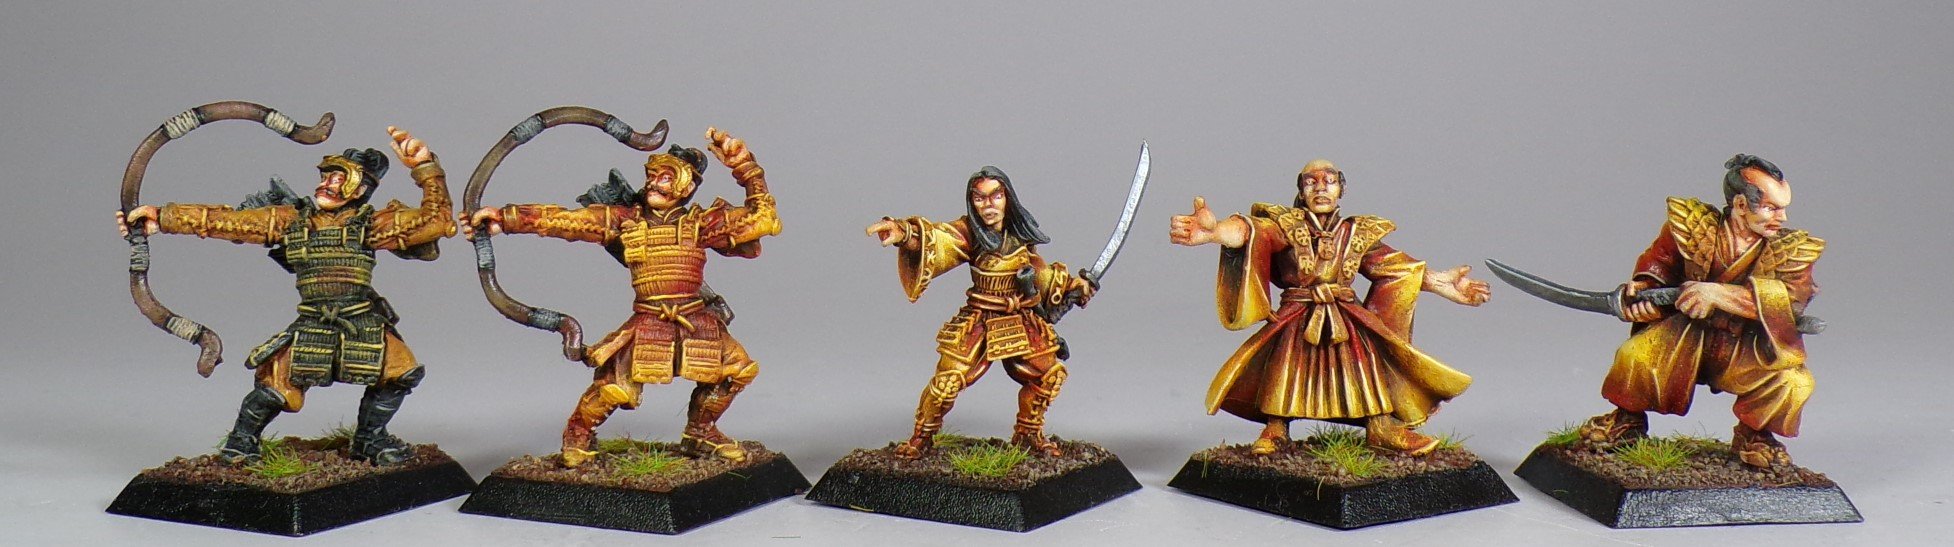 L5R Legend of the Five Rings Miniature Painting Service Paintedfigs (71).jpg